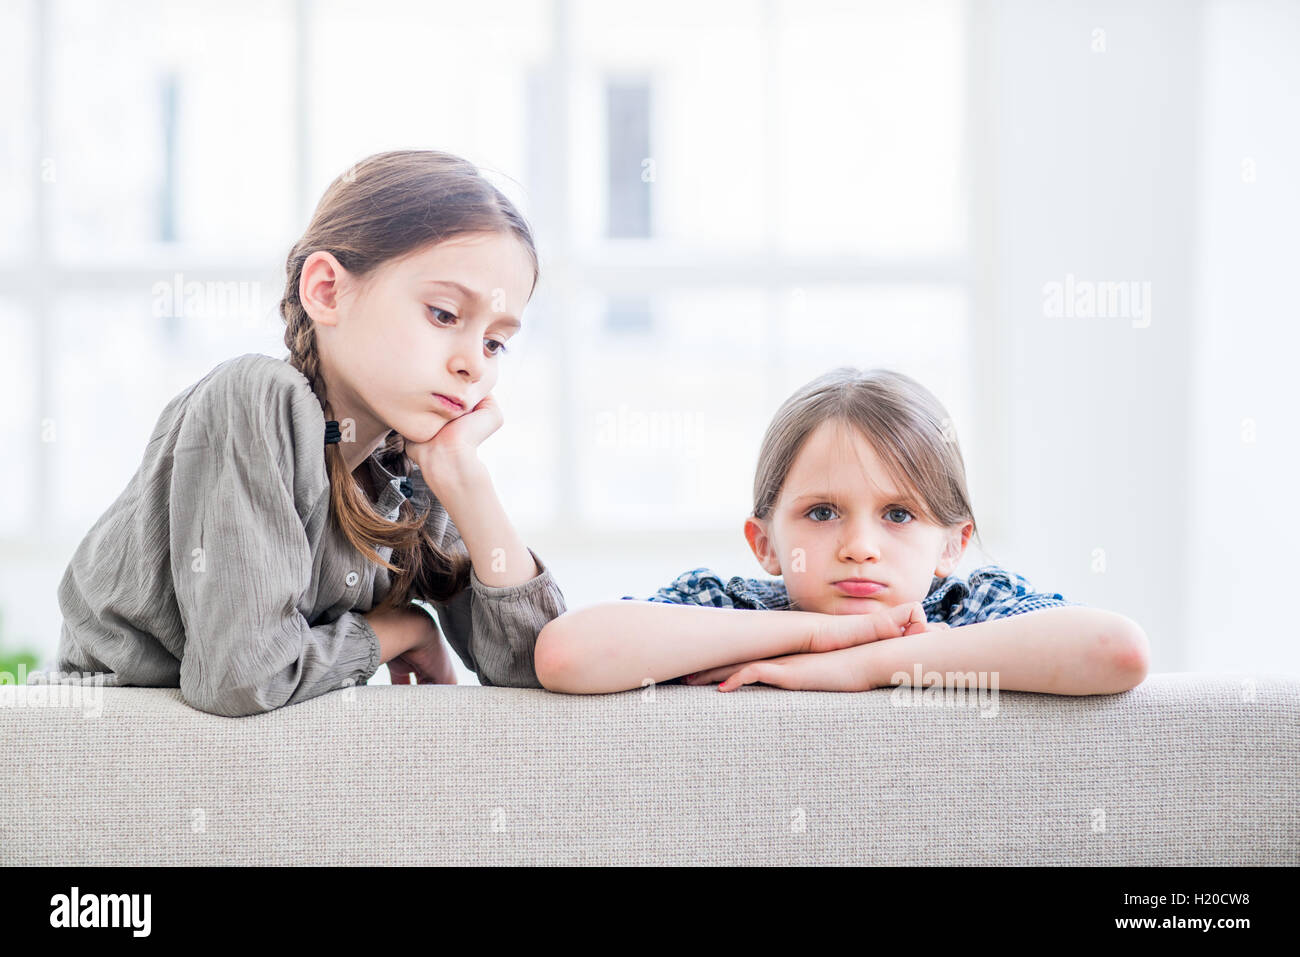 7 and 9 year-old girls. Stock Photo